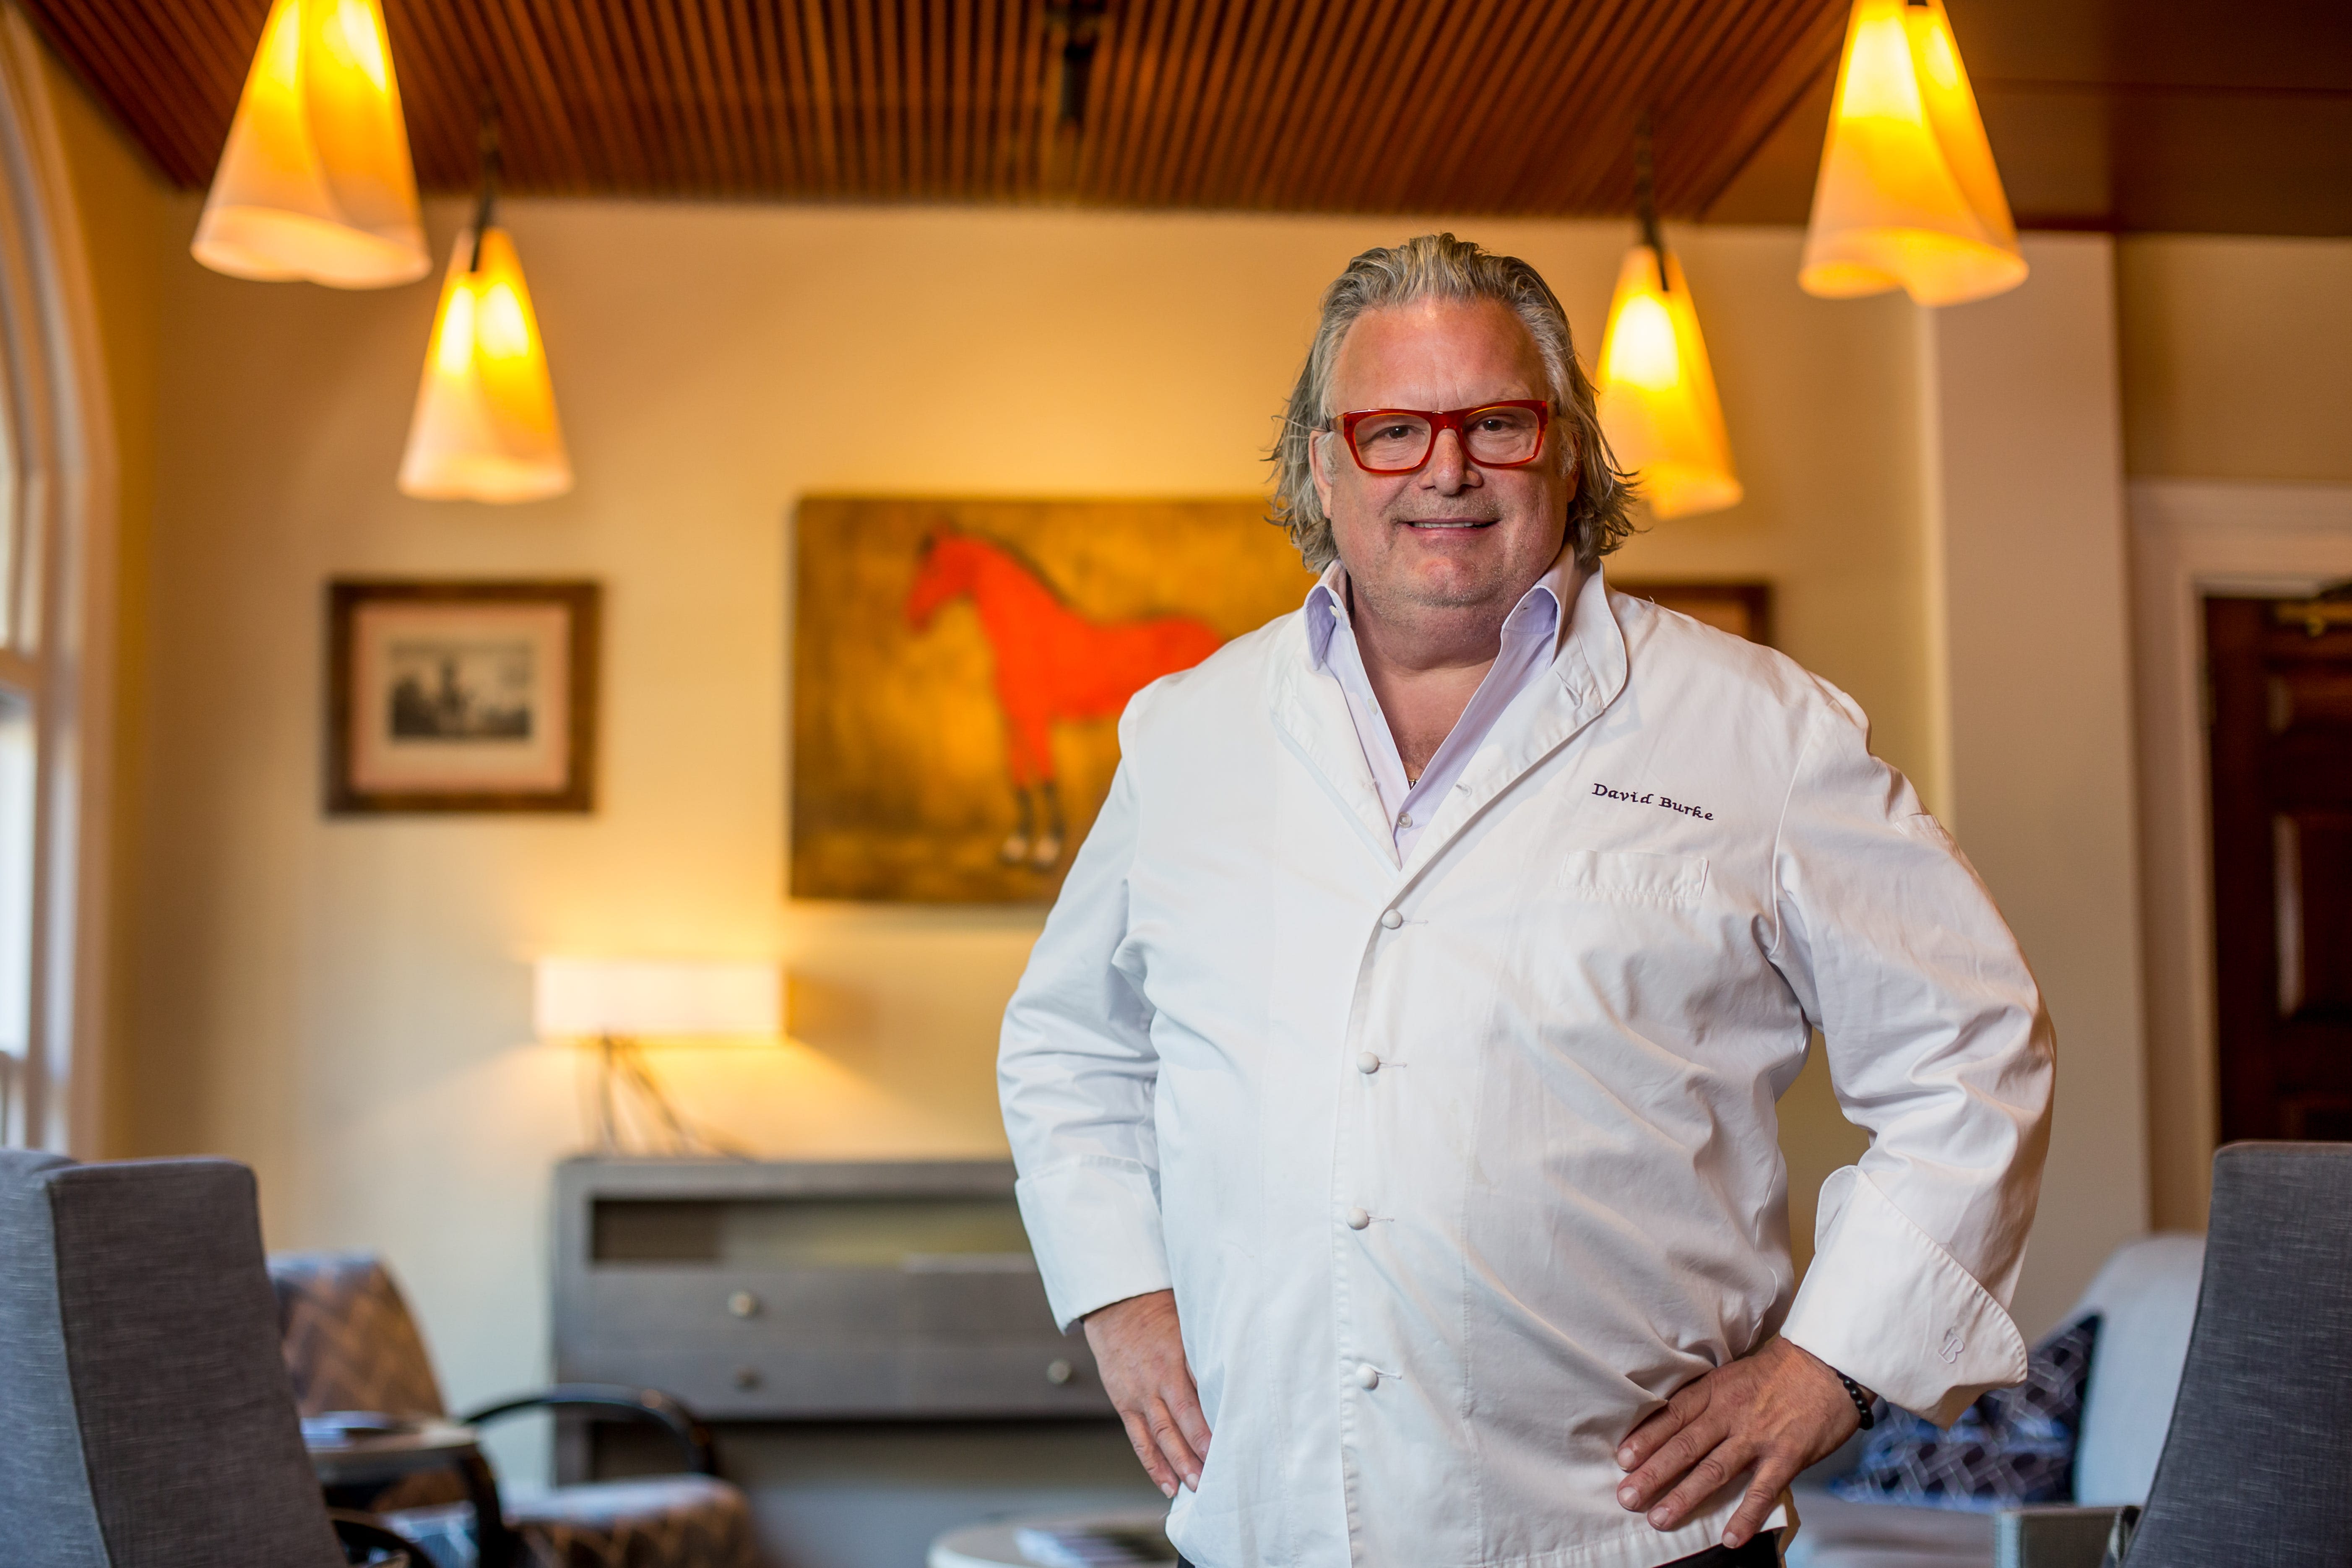 Chef David Burke dinner cruise coming in June to Atlantic Highlands